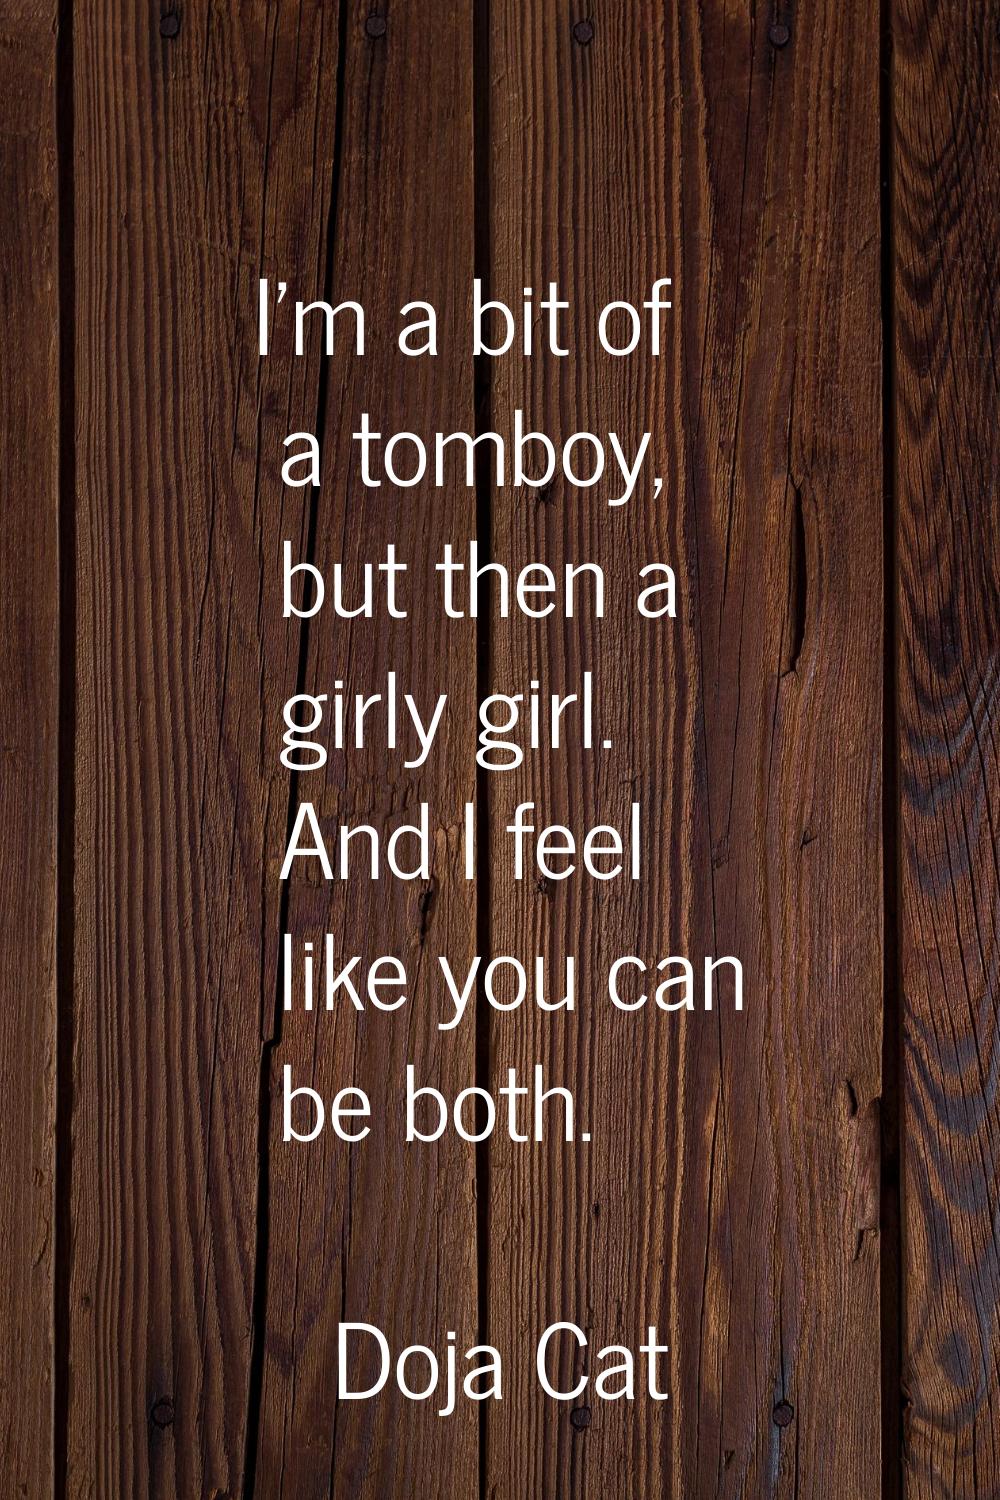 I'm a bit of a tomboy, but then a girly girl. And I feel like you can be both.